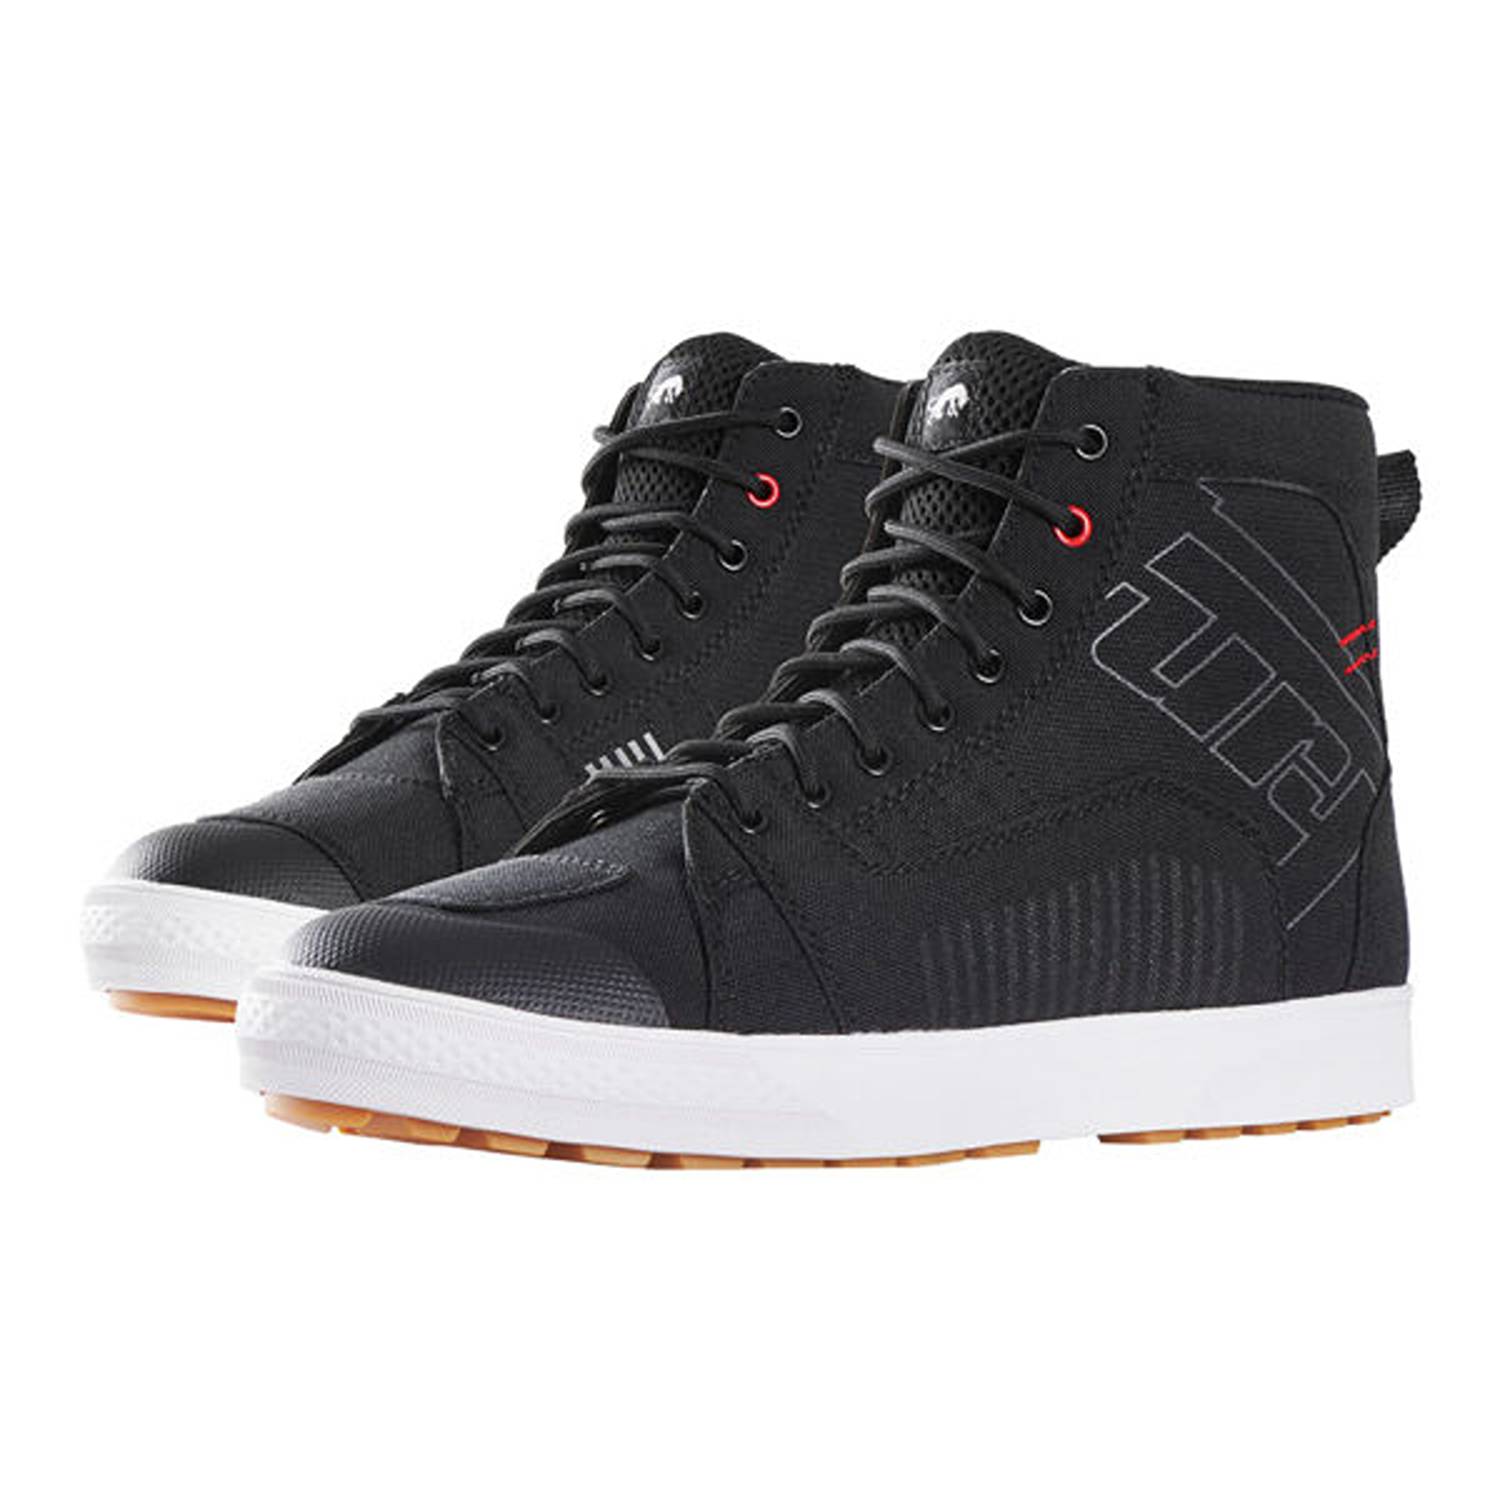 Image of EU Furygan Stockton Air D30 Shoes Black Red Taille 43